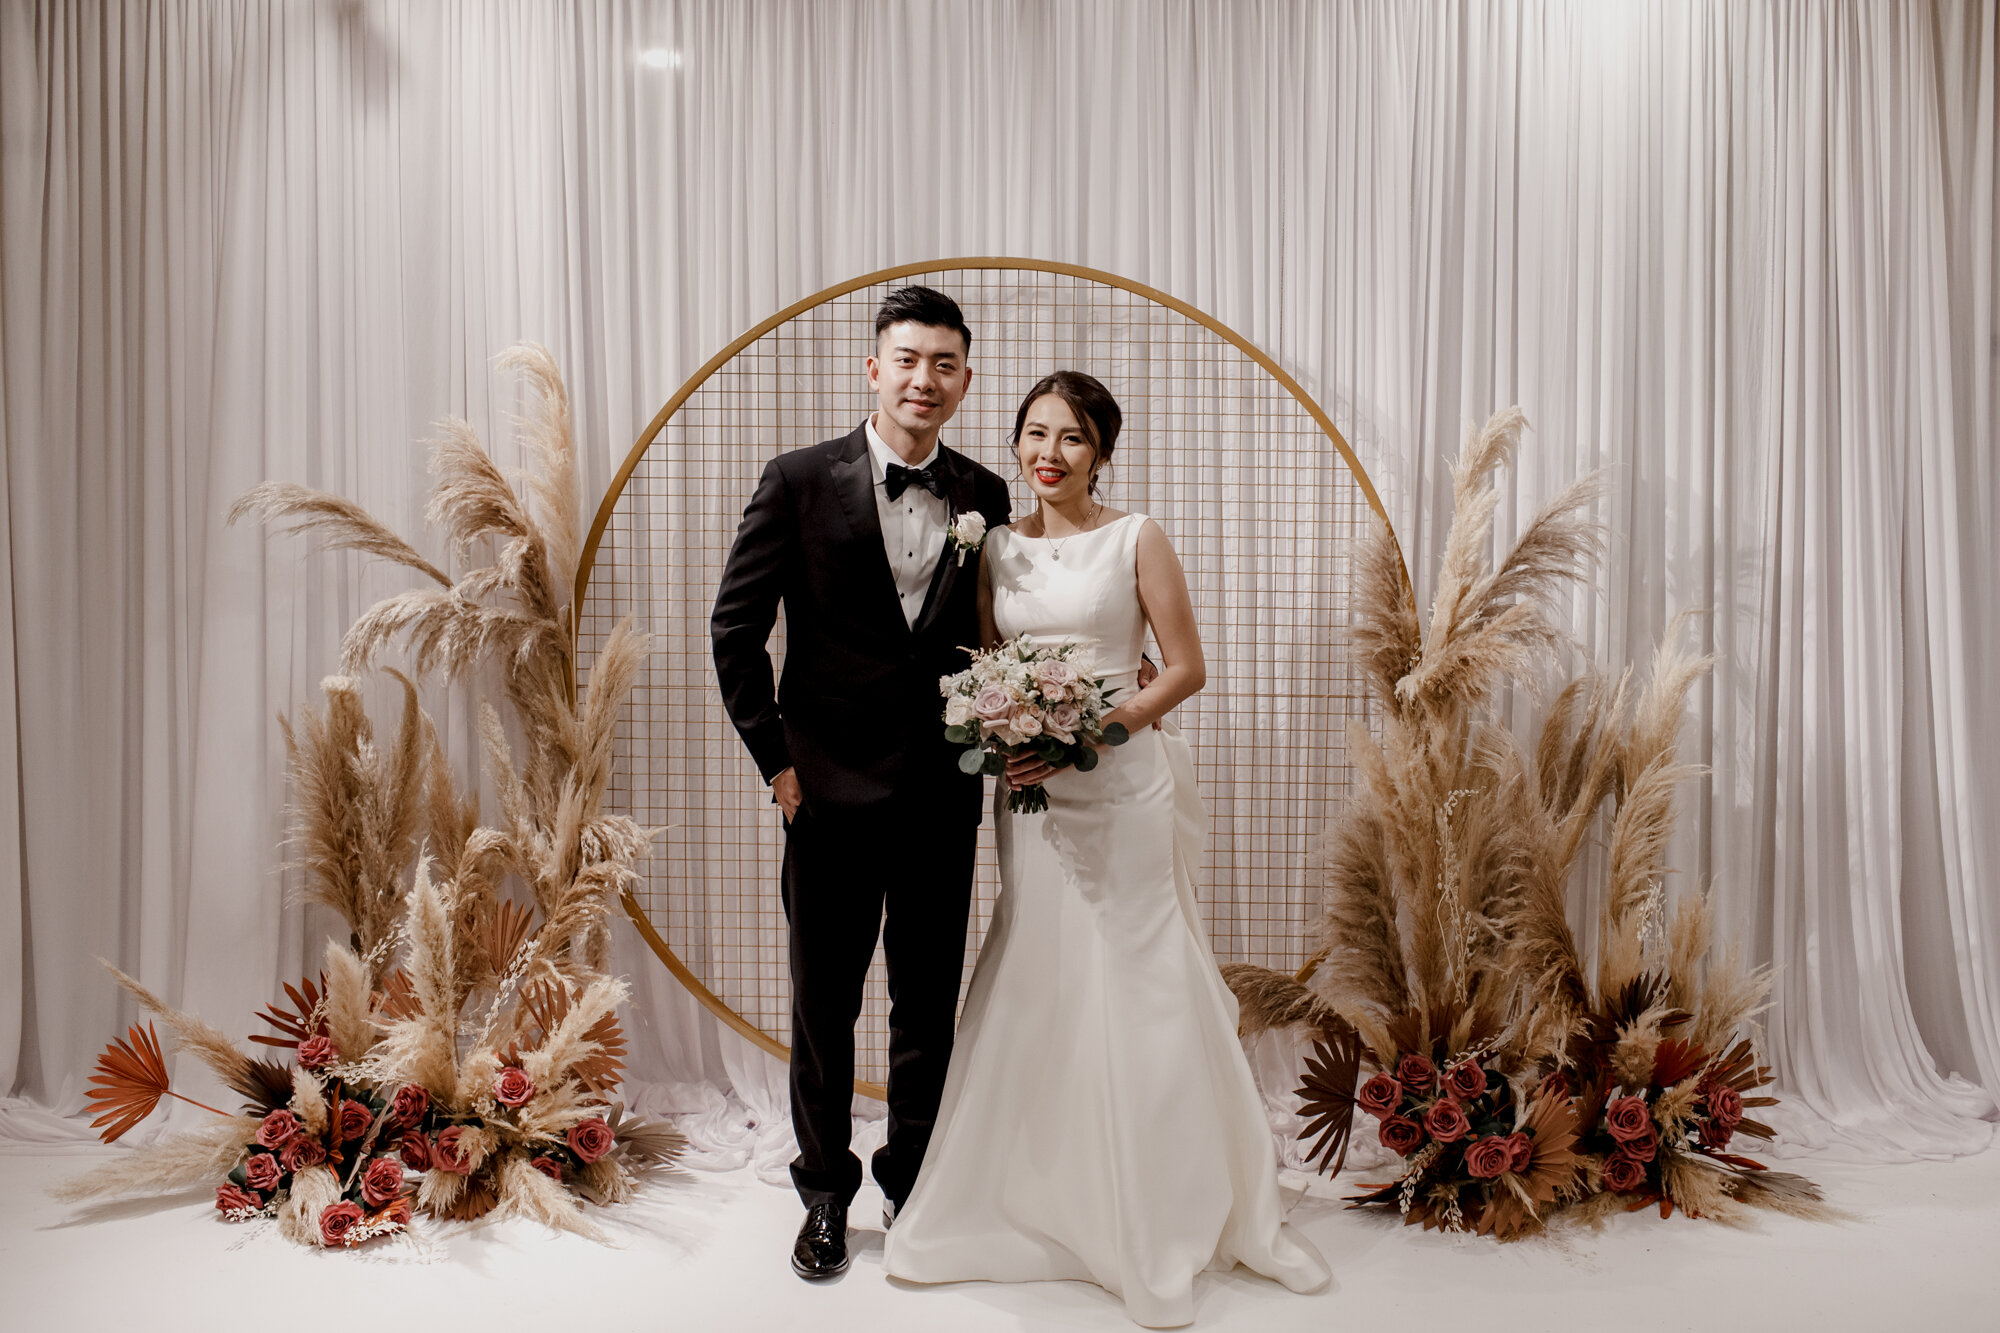 Bride and groom at Urban Elegant East Asian Wedding at Chateau De L’Amour